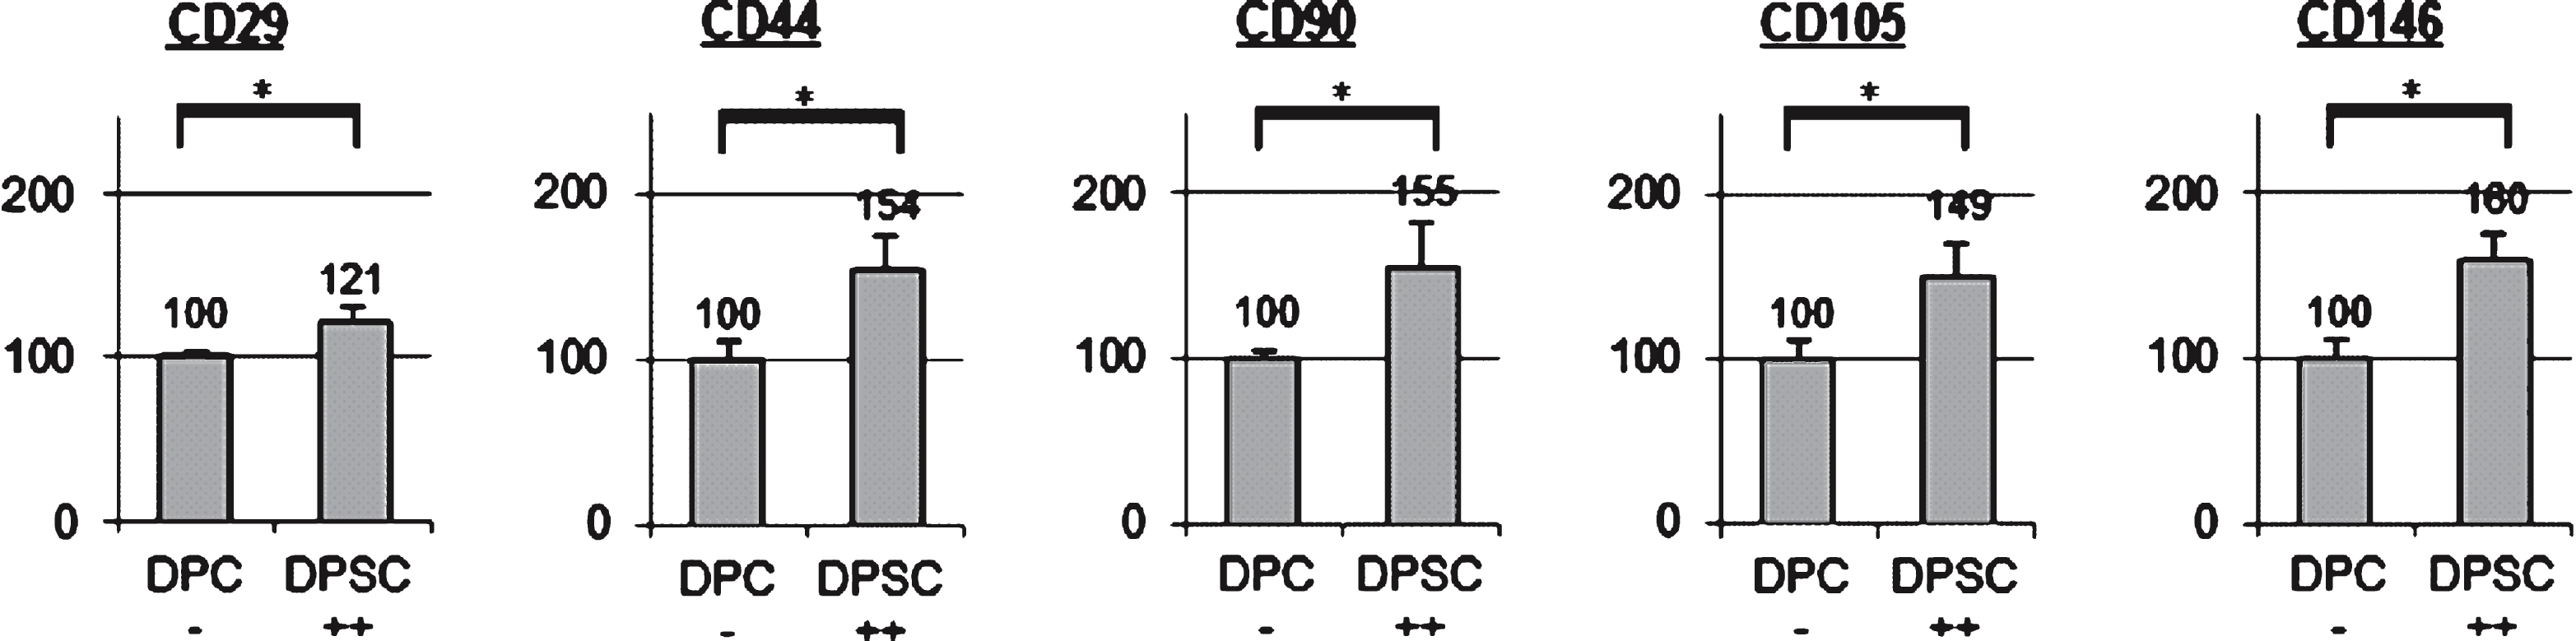 Expression of markers for mesenchymal stromal cells (CD29, CD44, CD90, CD105, and CD146) in STRO-1 positive sorted pulp cells of human wisdom teeth (DPSC ++). STRO-1  - dental pulp cells (DPC −) were used as control;  *indicates significant differences (p <  0.05); + +strong expression of the CD markers.